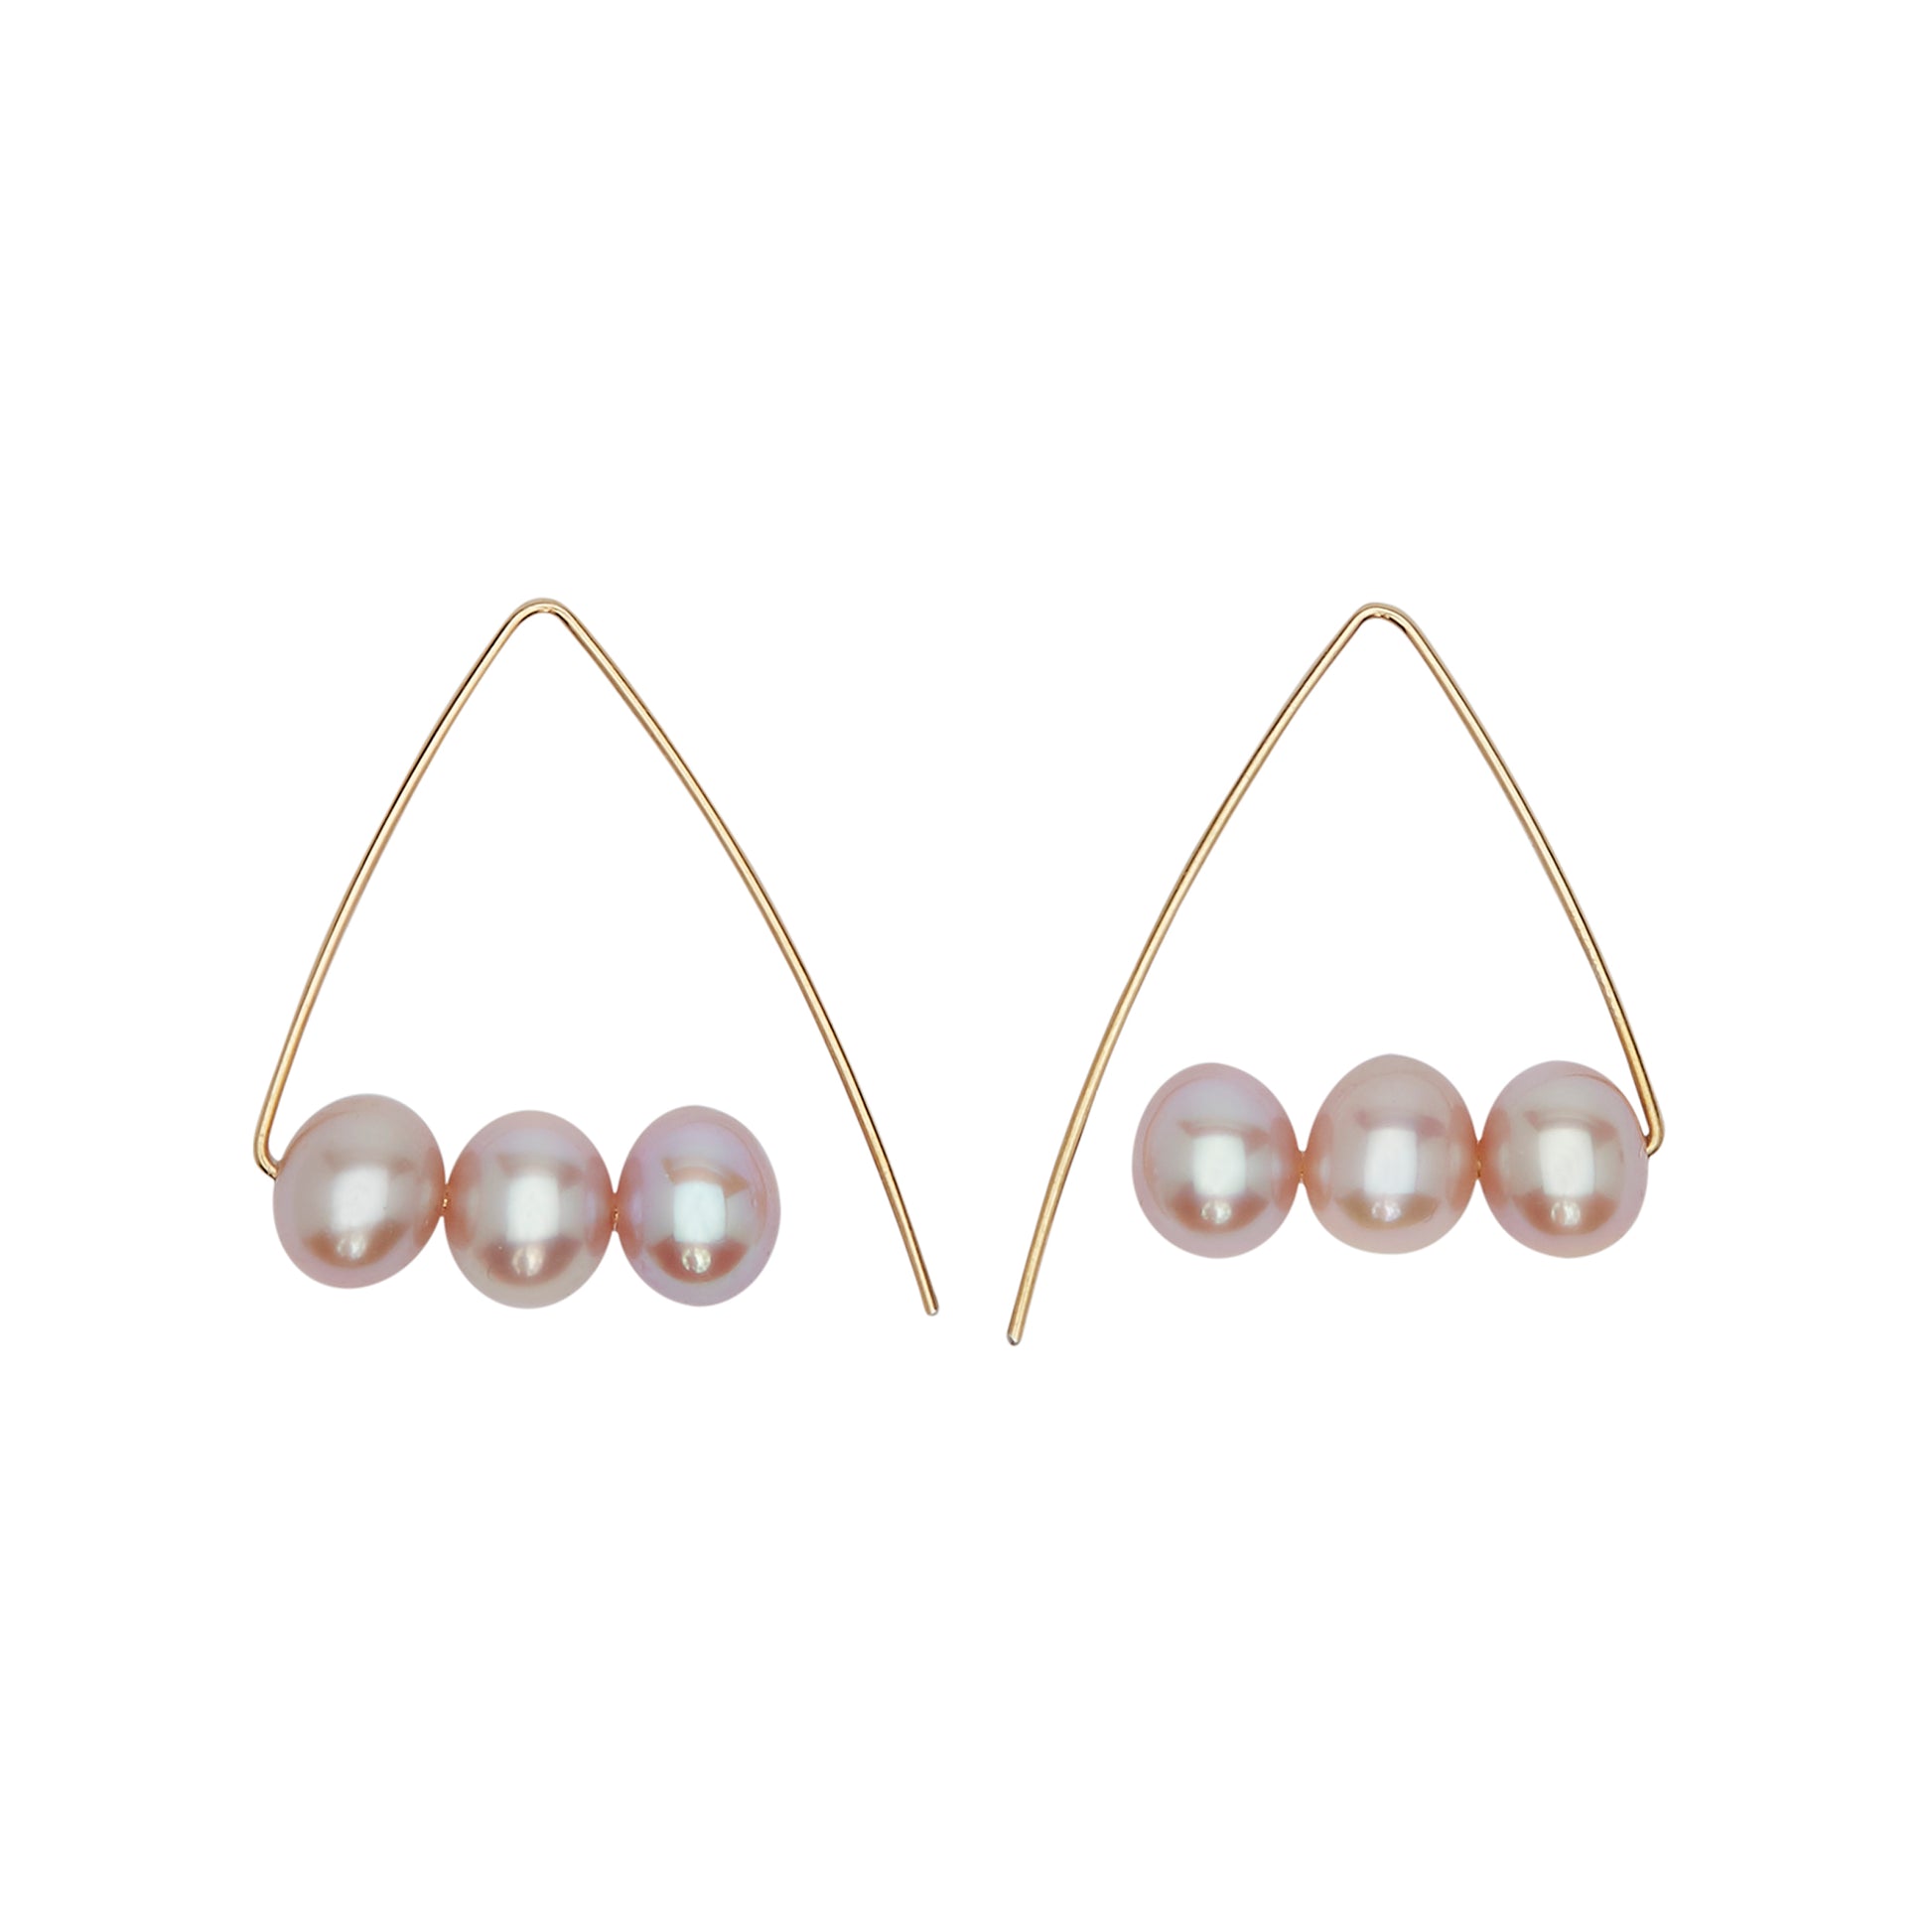 Petite Triangle Hoops with Rose Fresh Water Pearls (3mm)